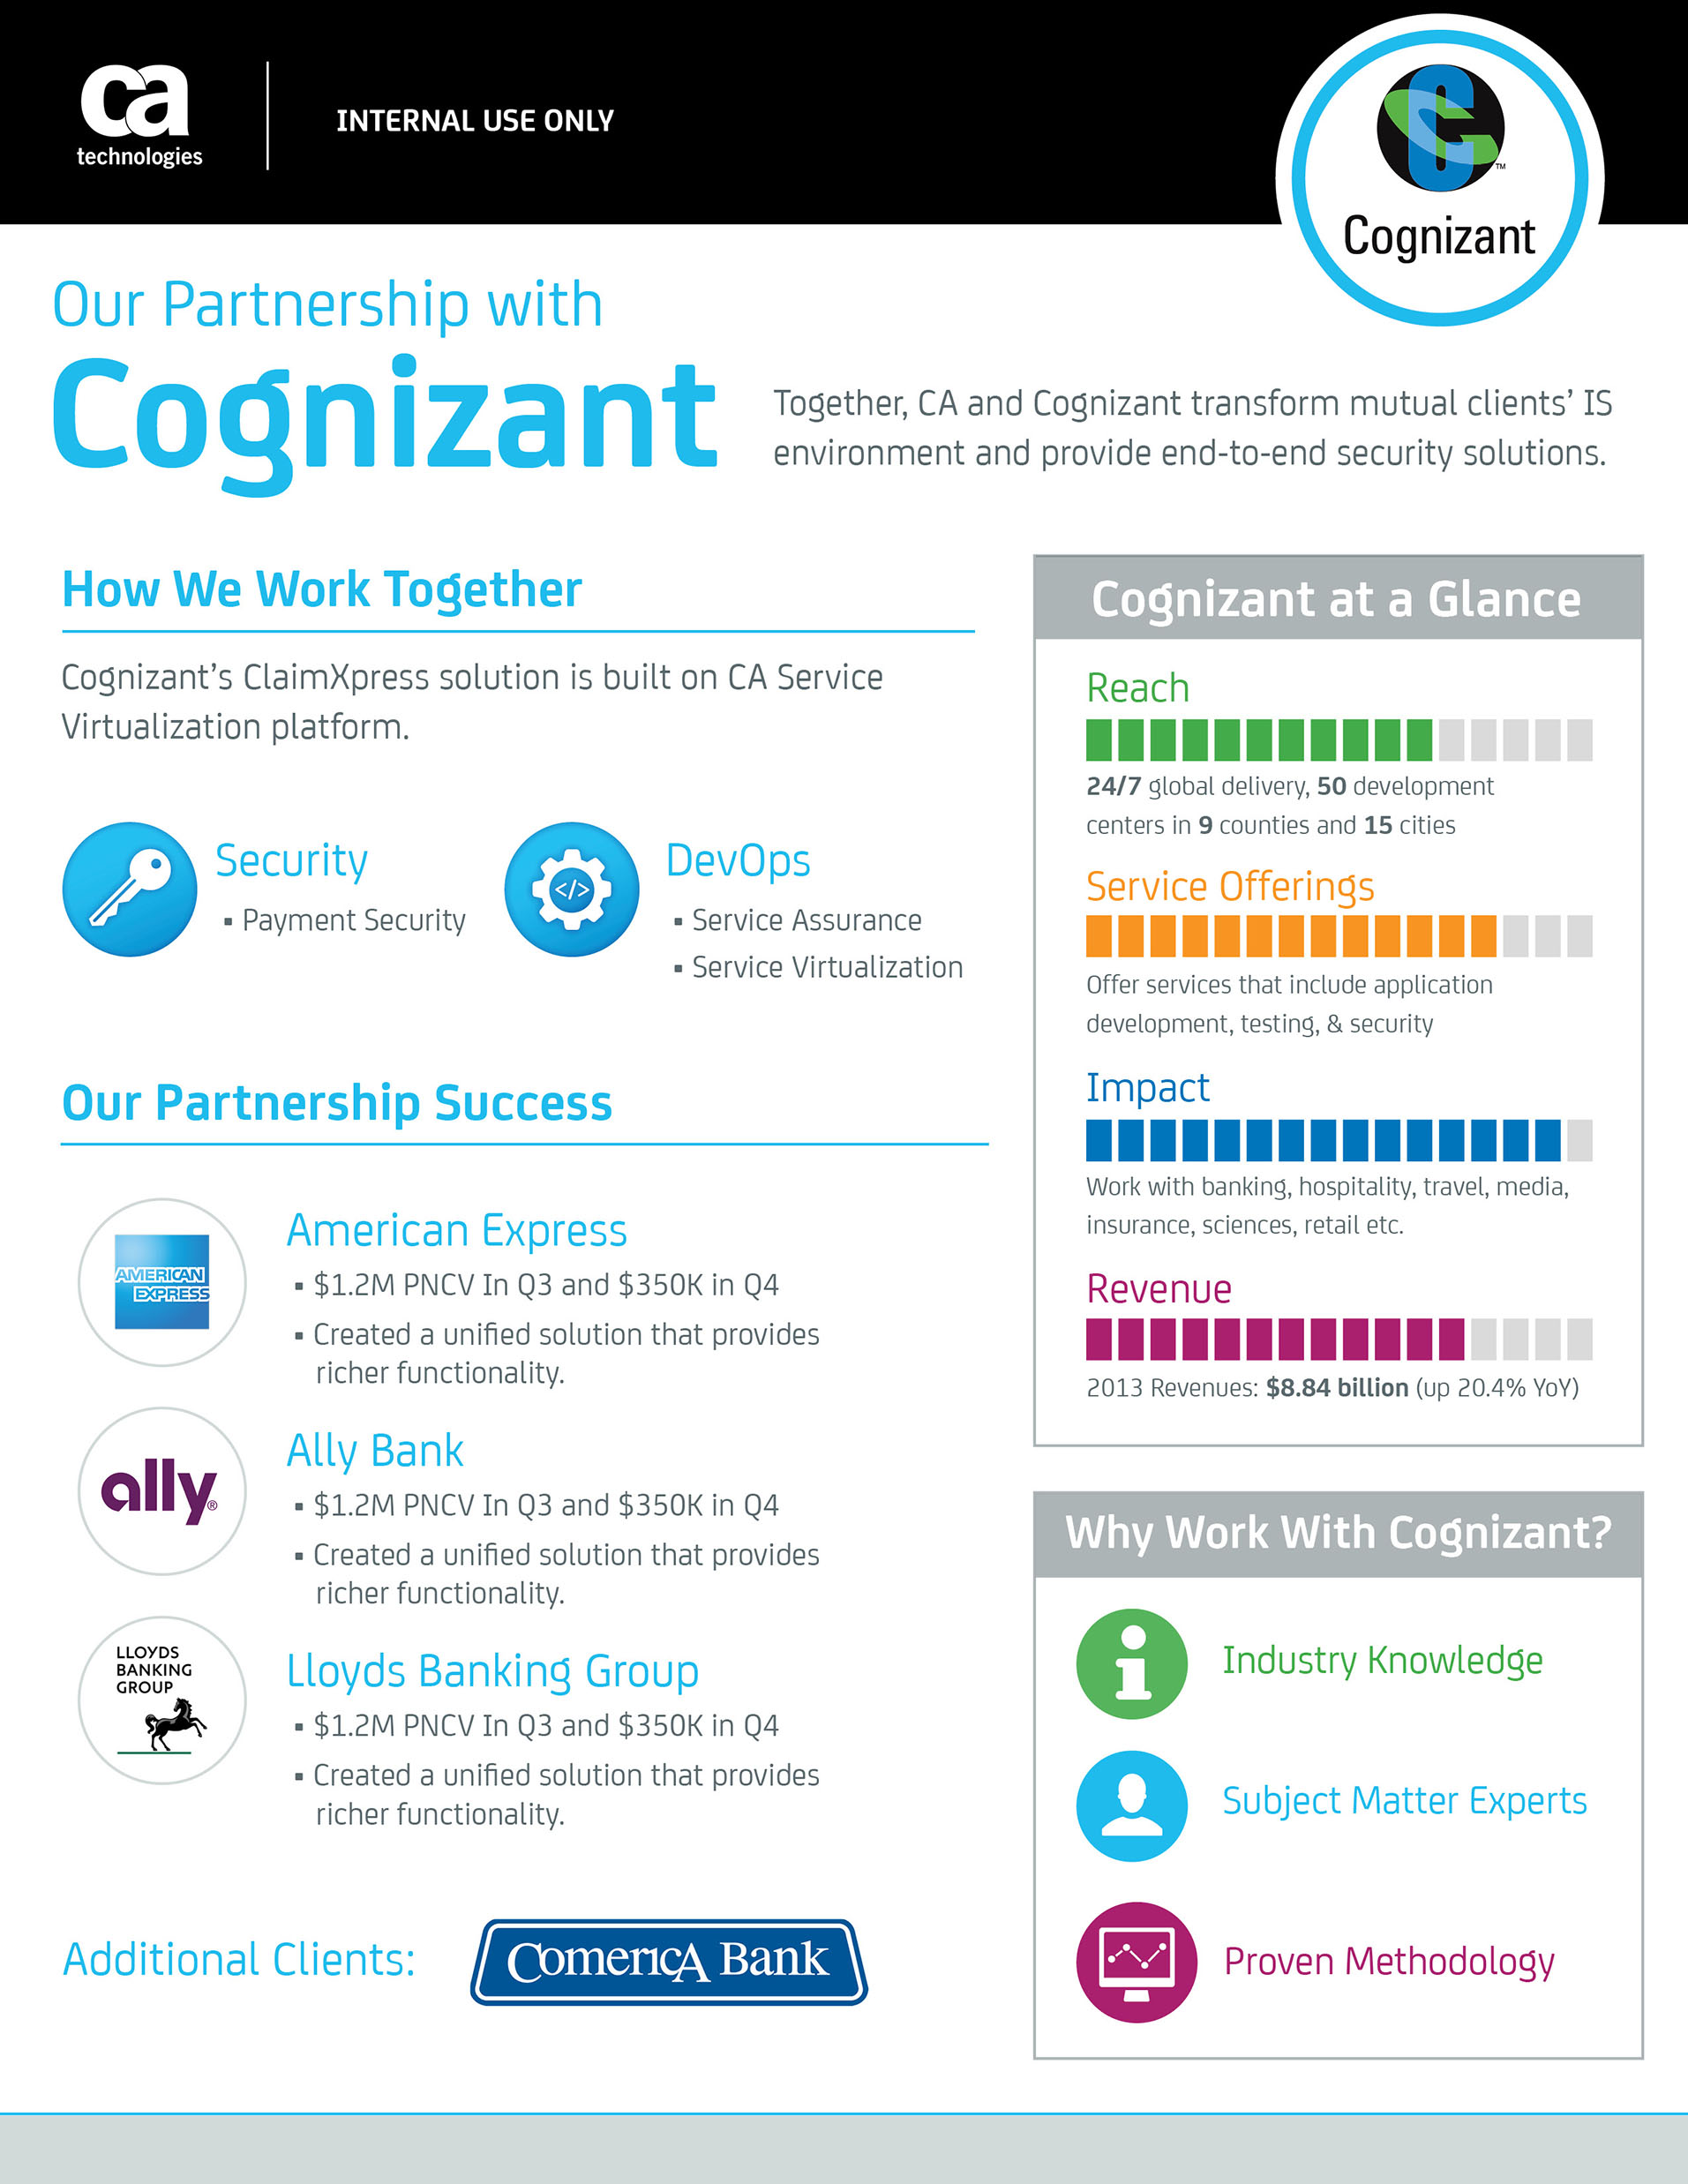 This infographic / One Pager was done in collaboration with AirTight for CA Technologies